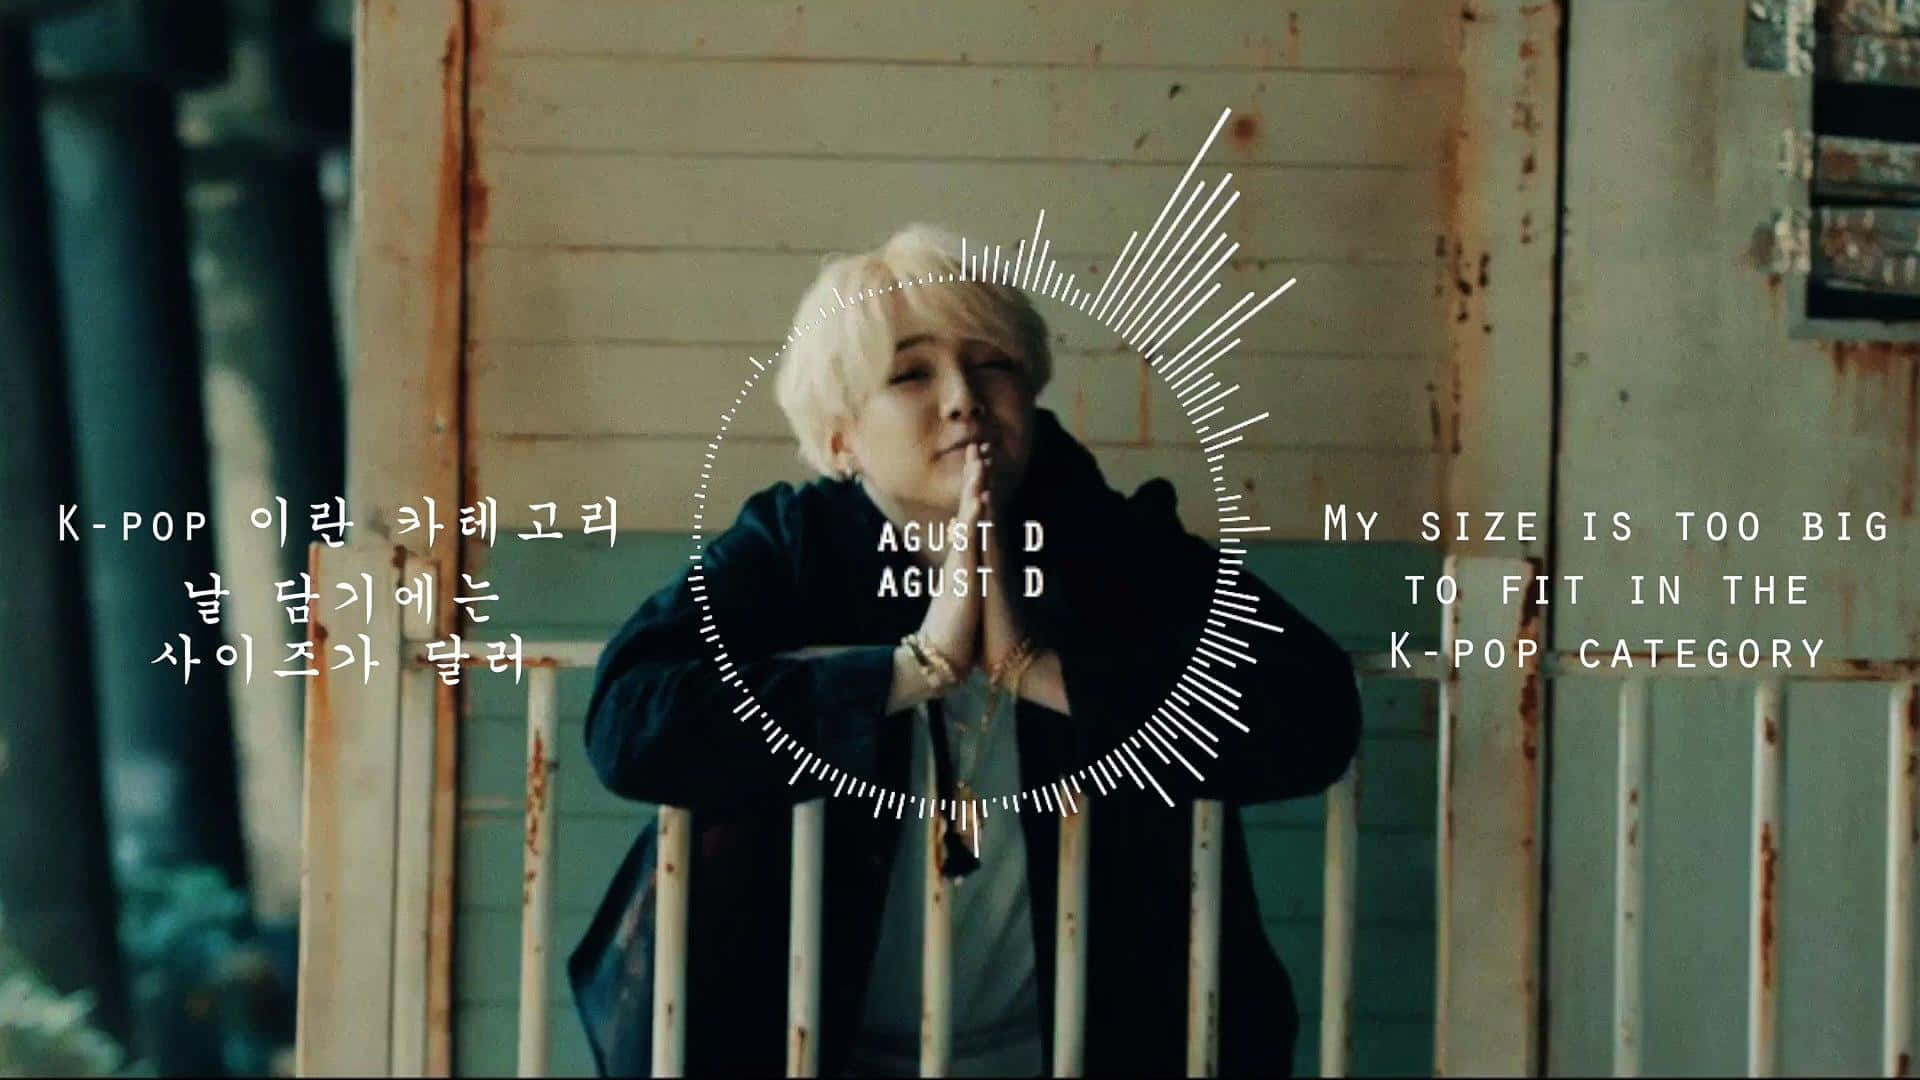 Agust D in a stylish and intense look, captivating the audience with his incredible rapping skills. Wallpaper